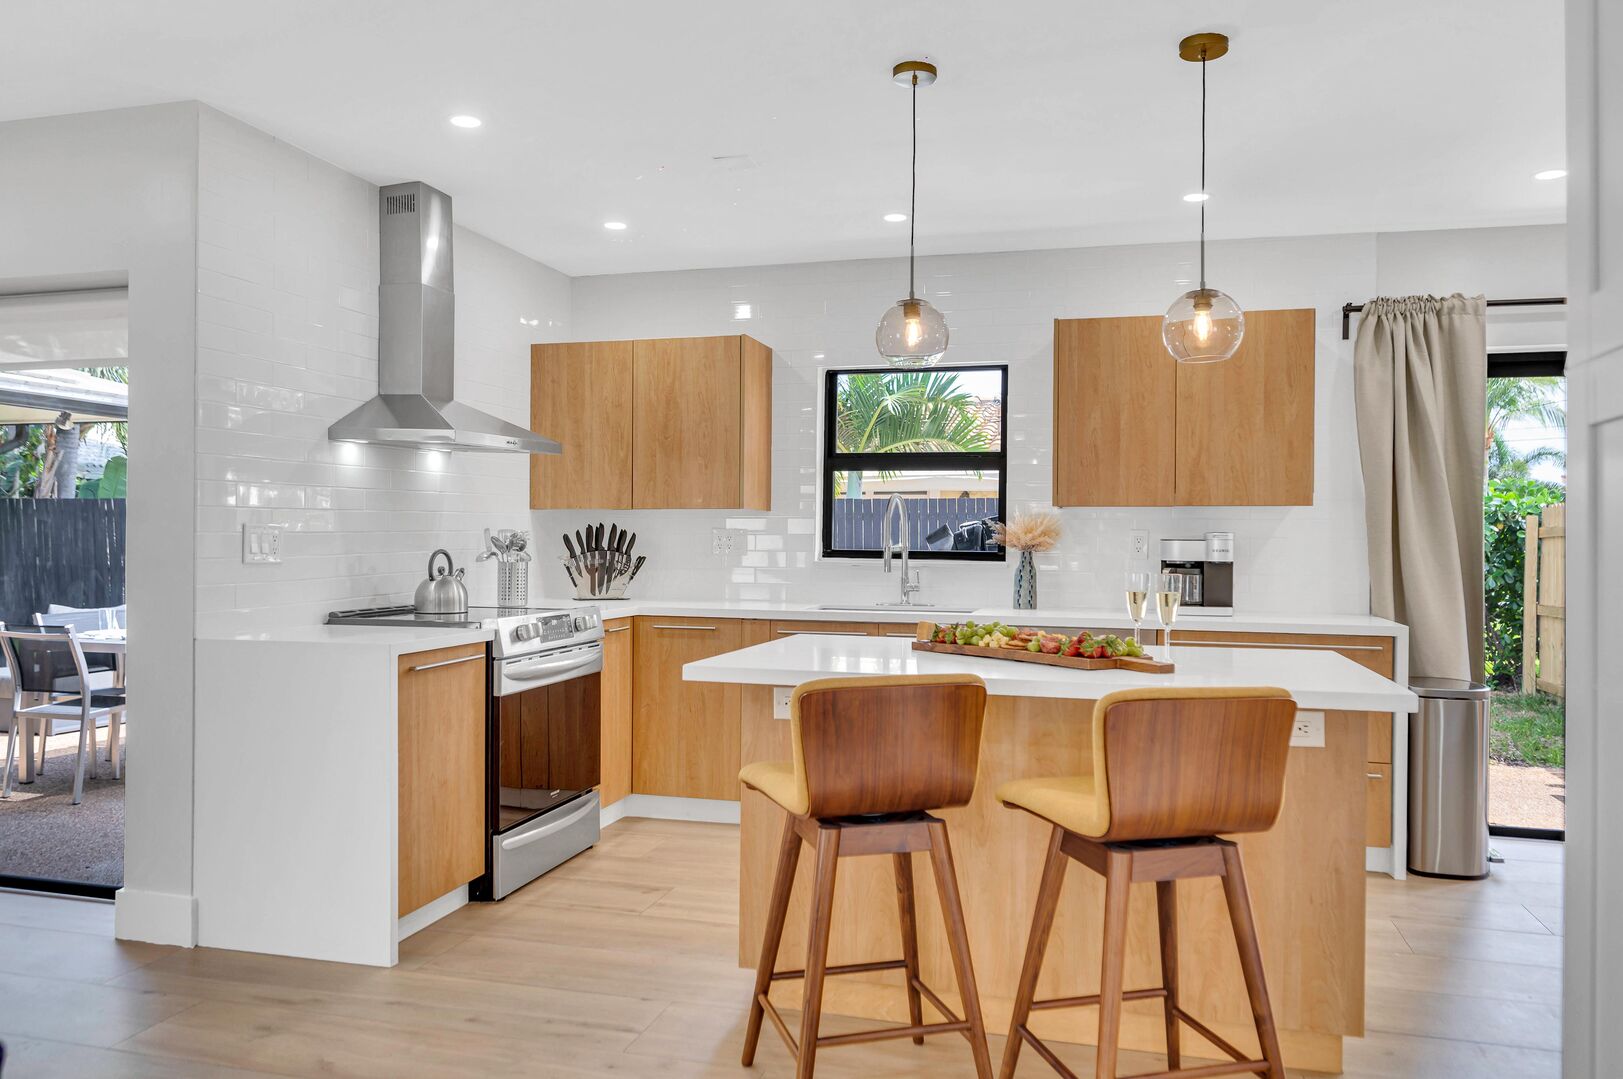 The kitchen comes with sleek countertops, modern appliances and bar seating for two people.